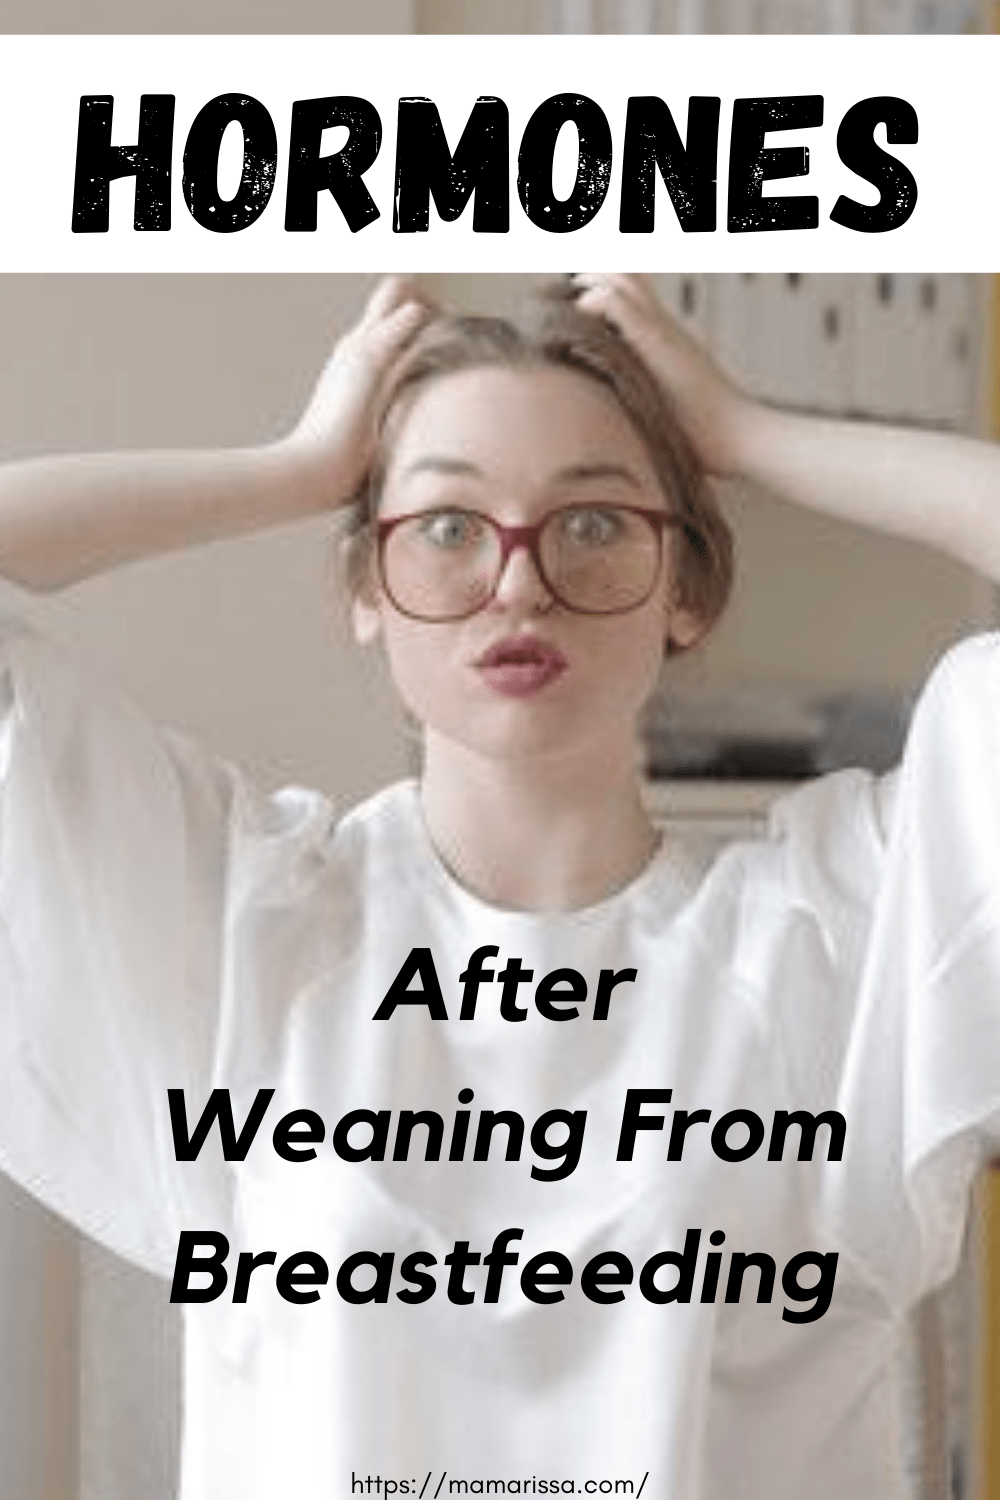 Hormones After Weaning from Breastfeeding